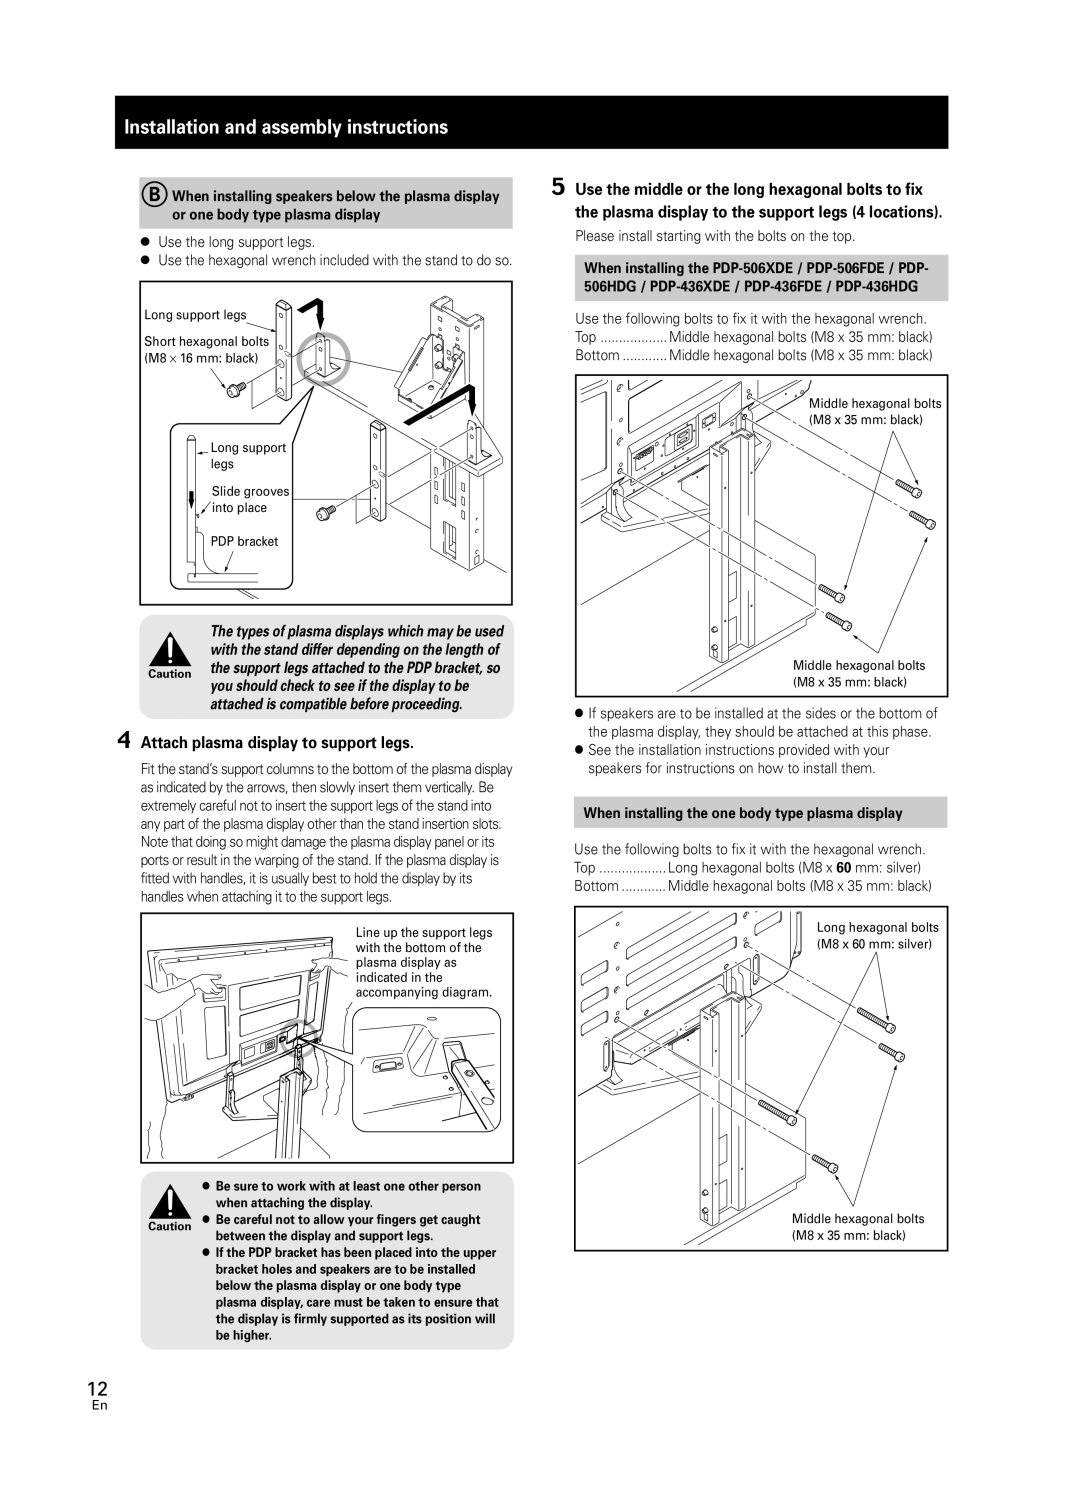 Pioneer PDK-FS05 manual Installation and assembly instructions, 4Attach plasma display to support legs 